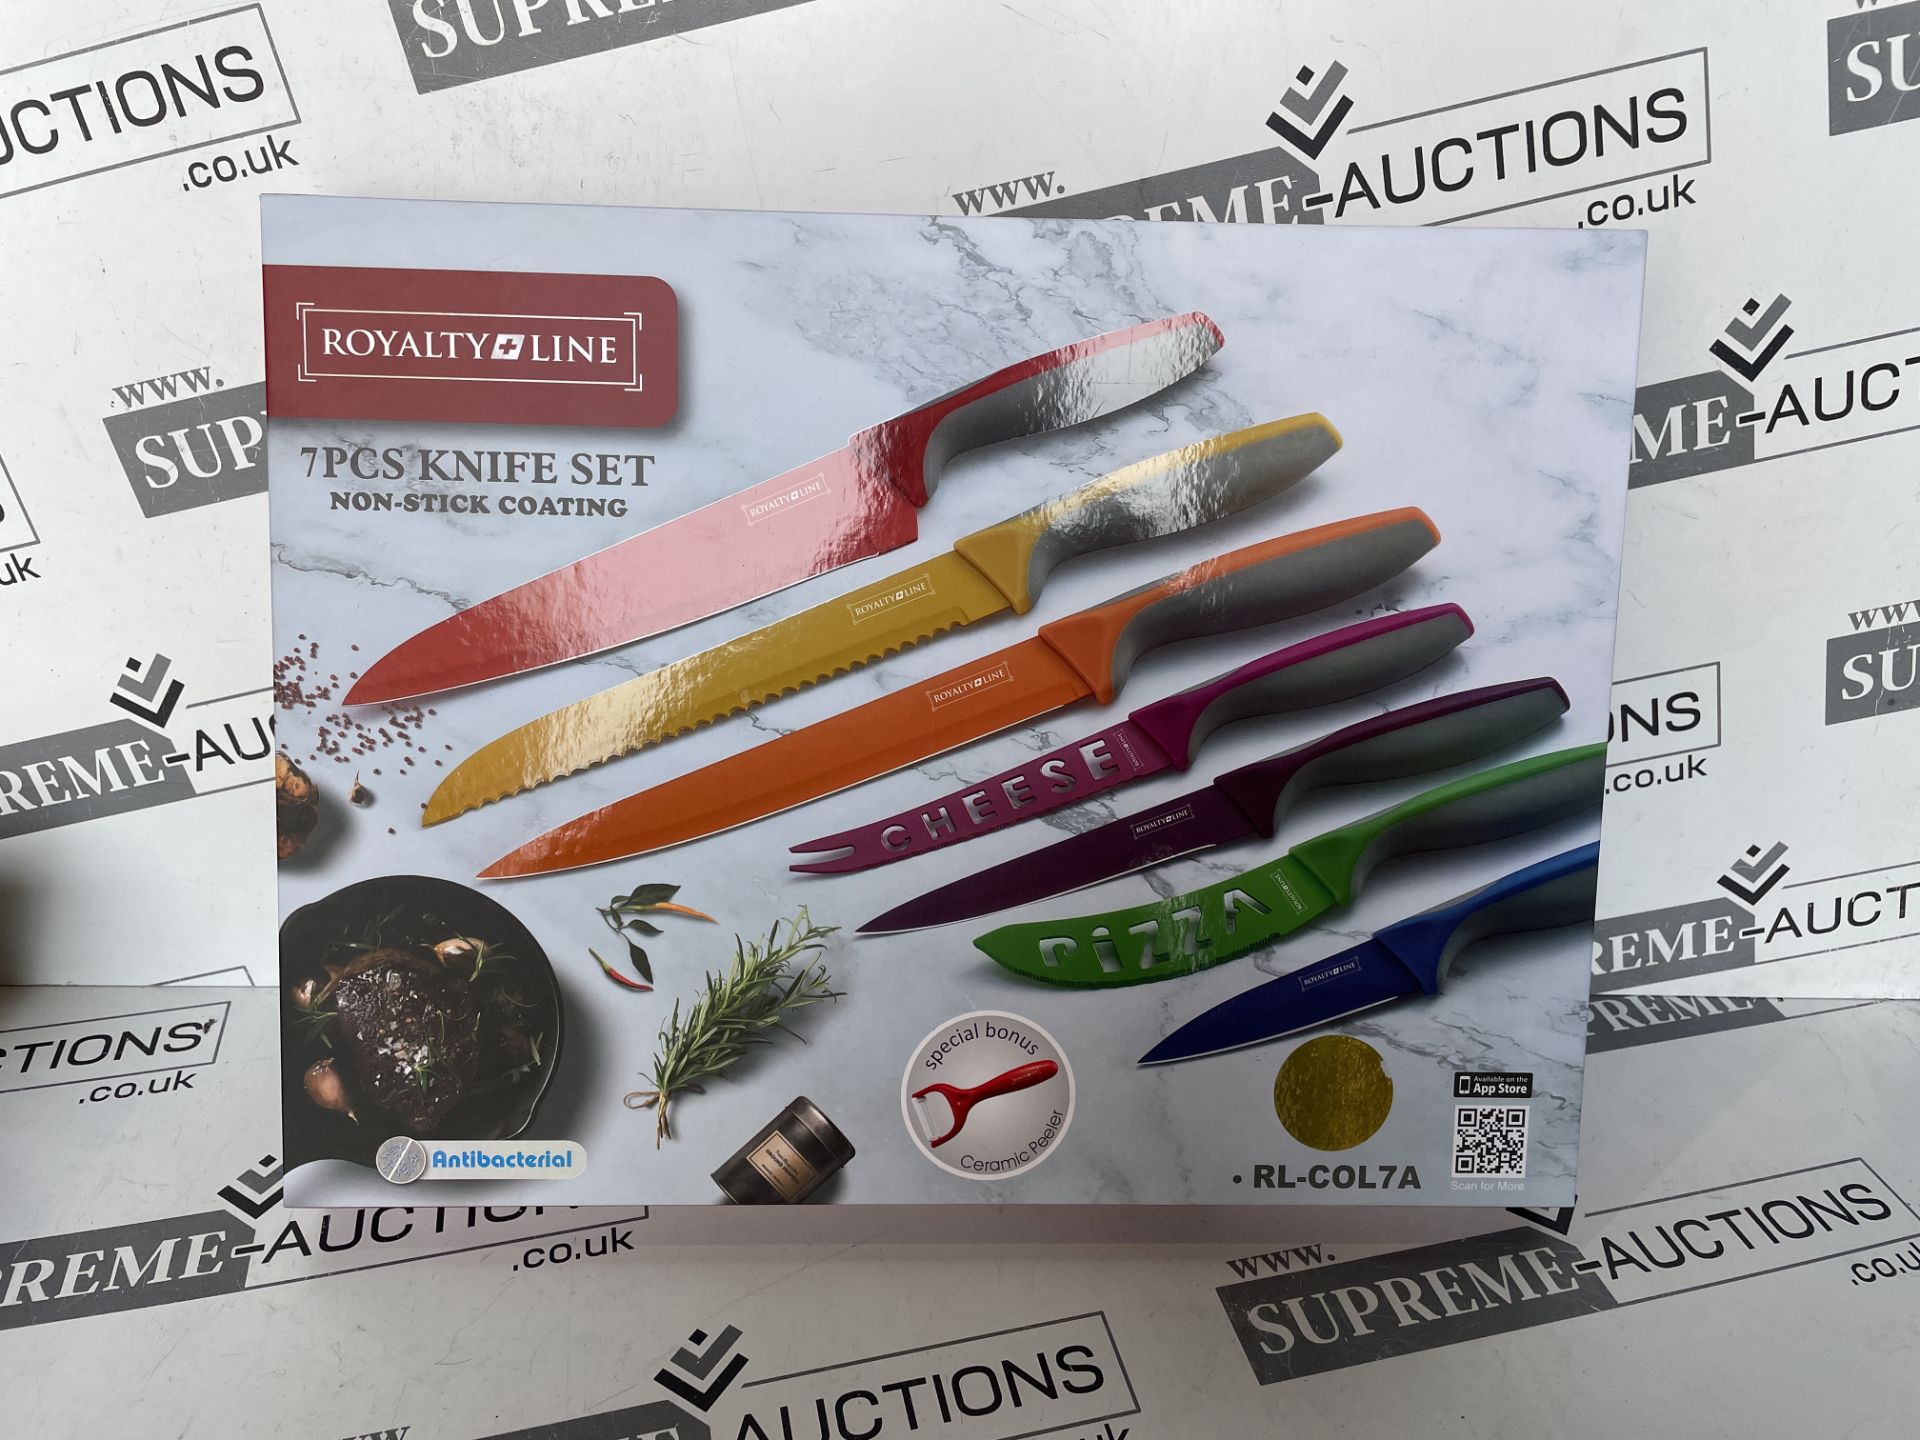 4 X BRAND NEW ROYALTY LINE 7 PIECE NON STICK COATING PREMIUM KNIFE SETS R17.7